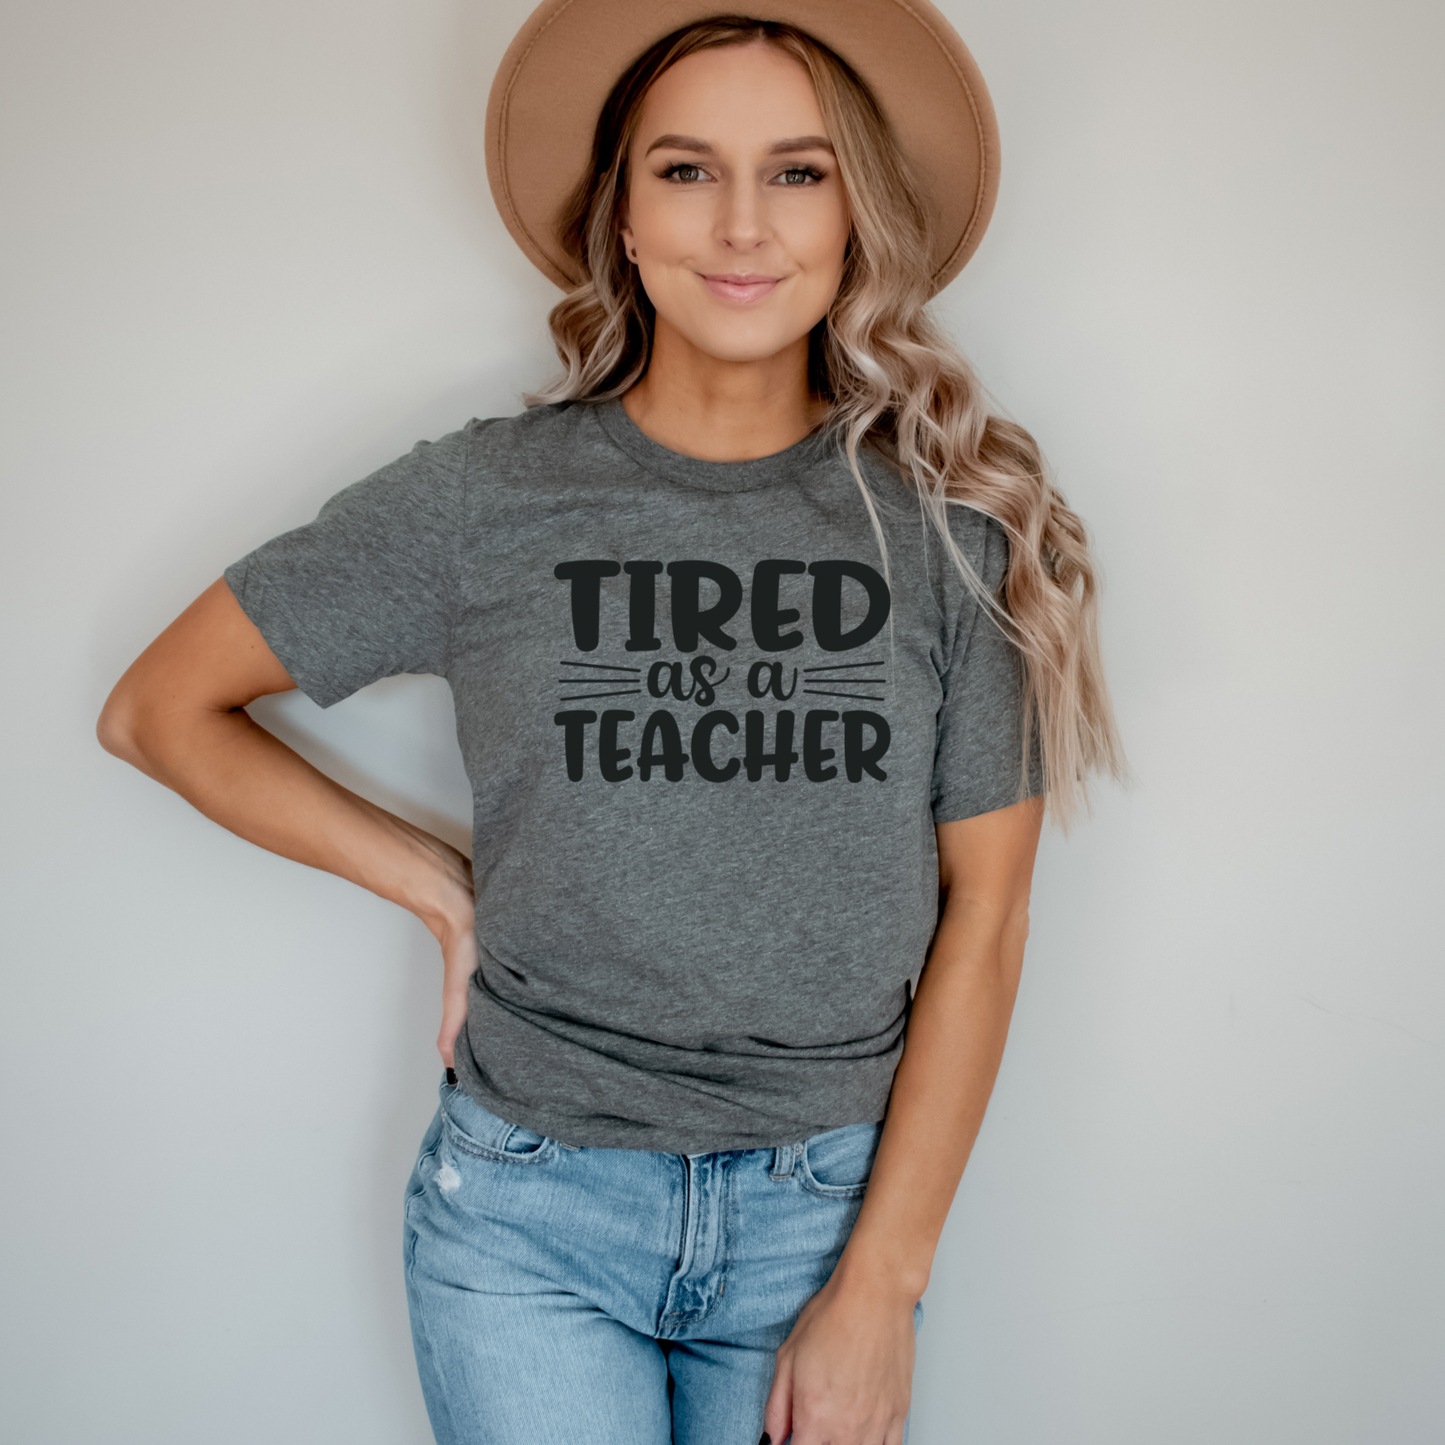 Tired As A Teacher - Ink Deposited Graphic Tee